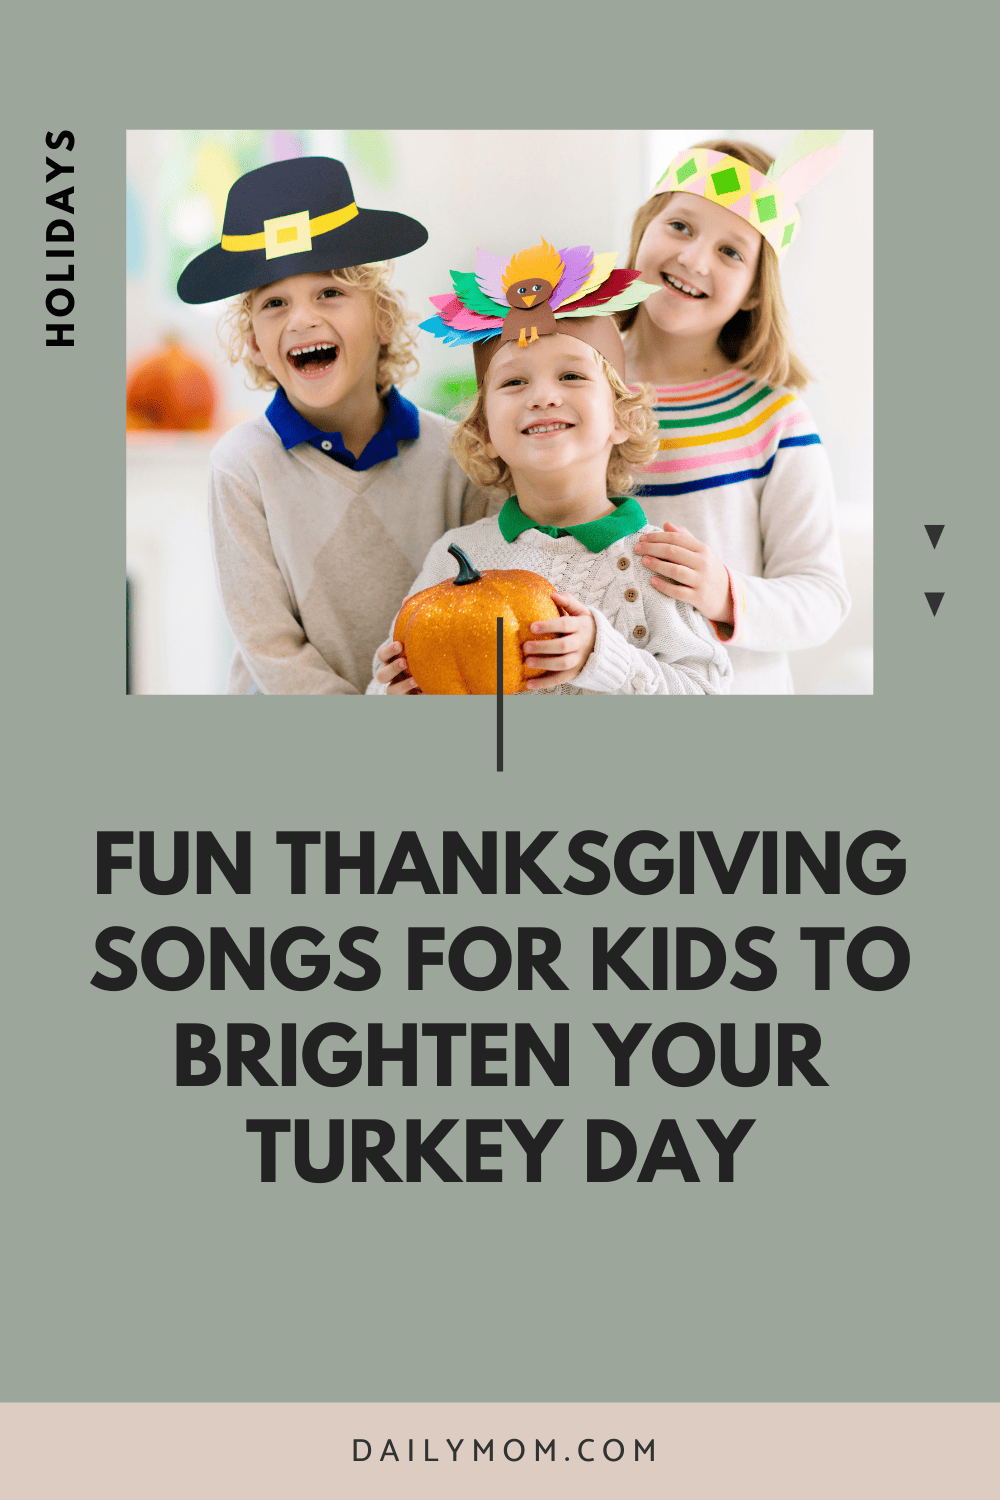 Daily Mom Parent Portal Thanksgiving Songs For Kids